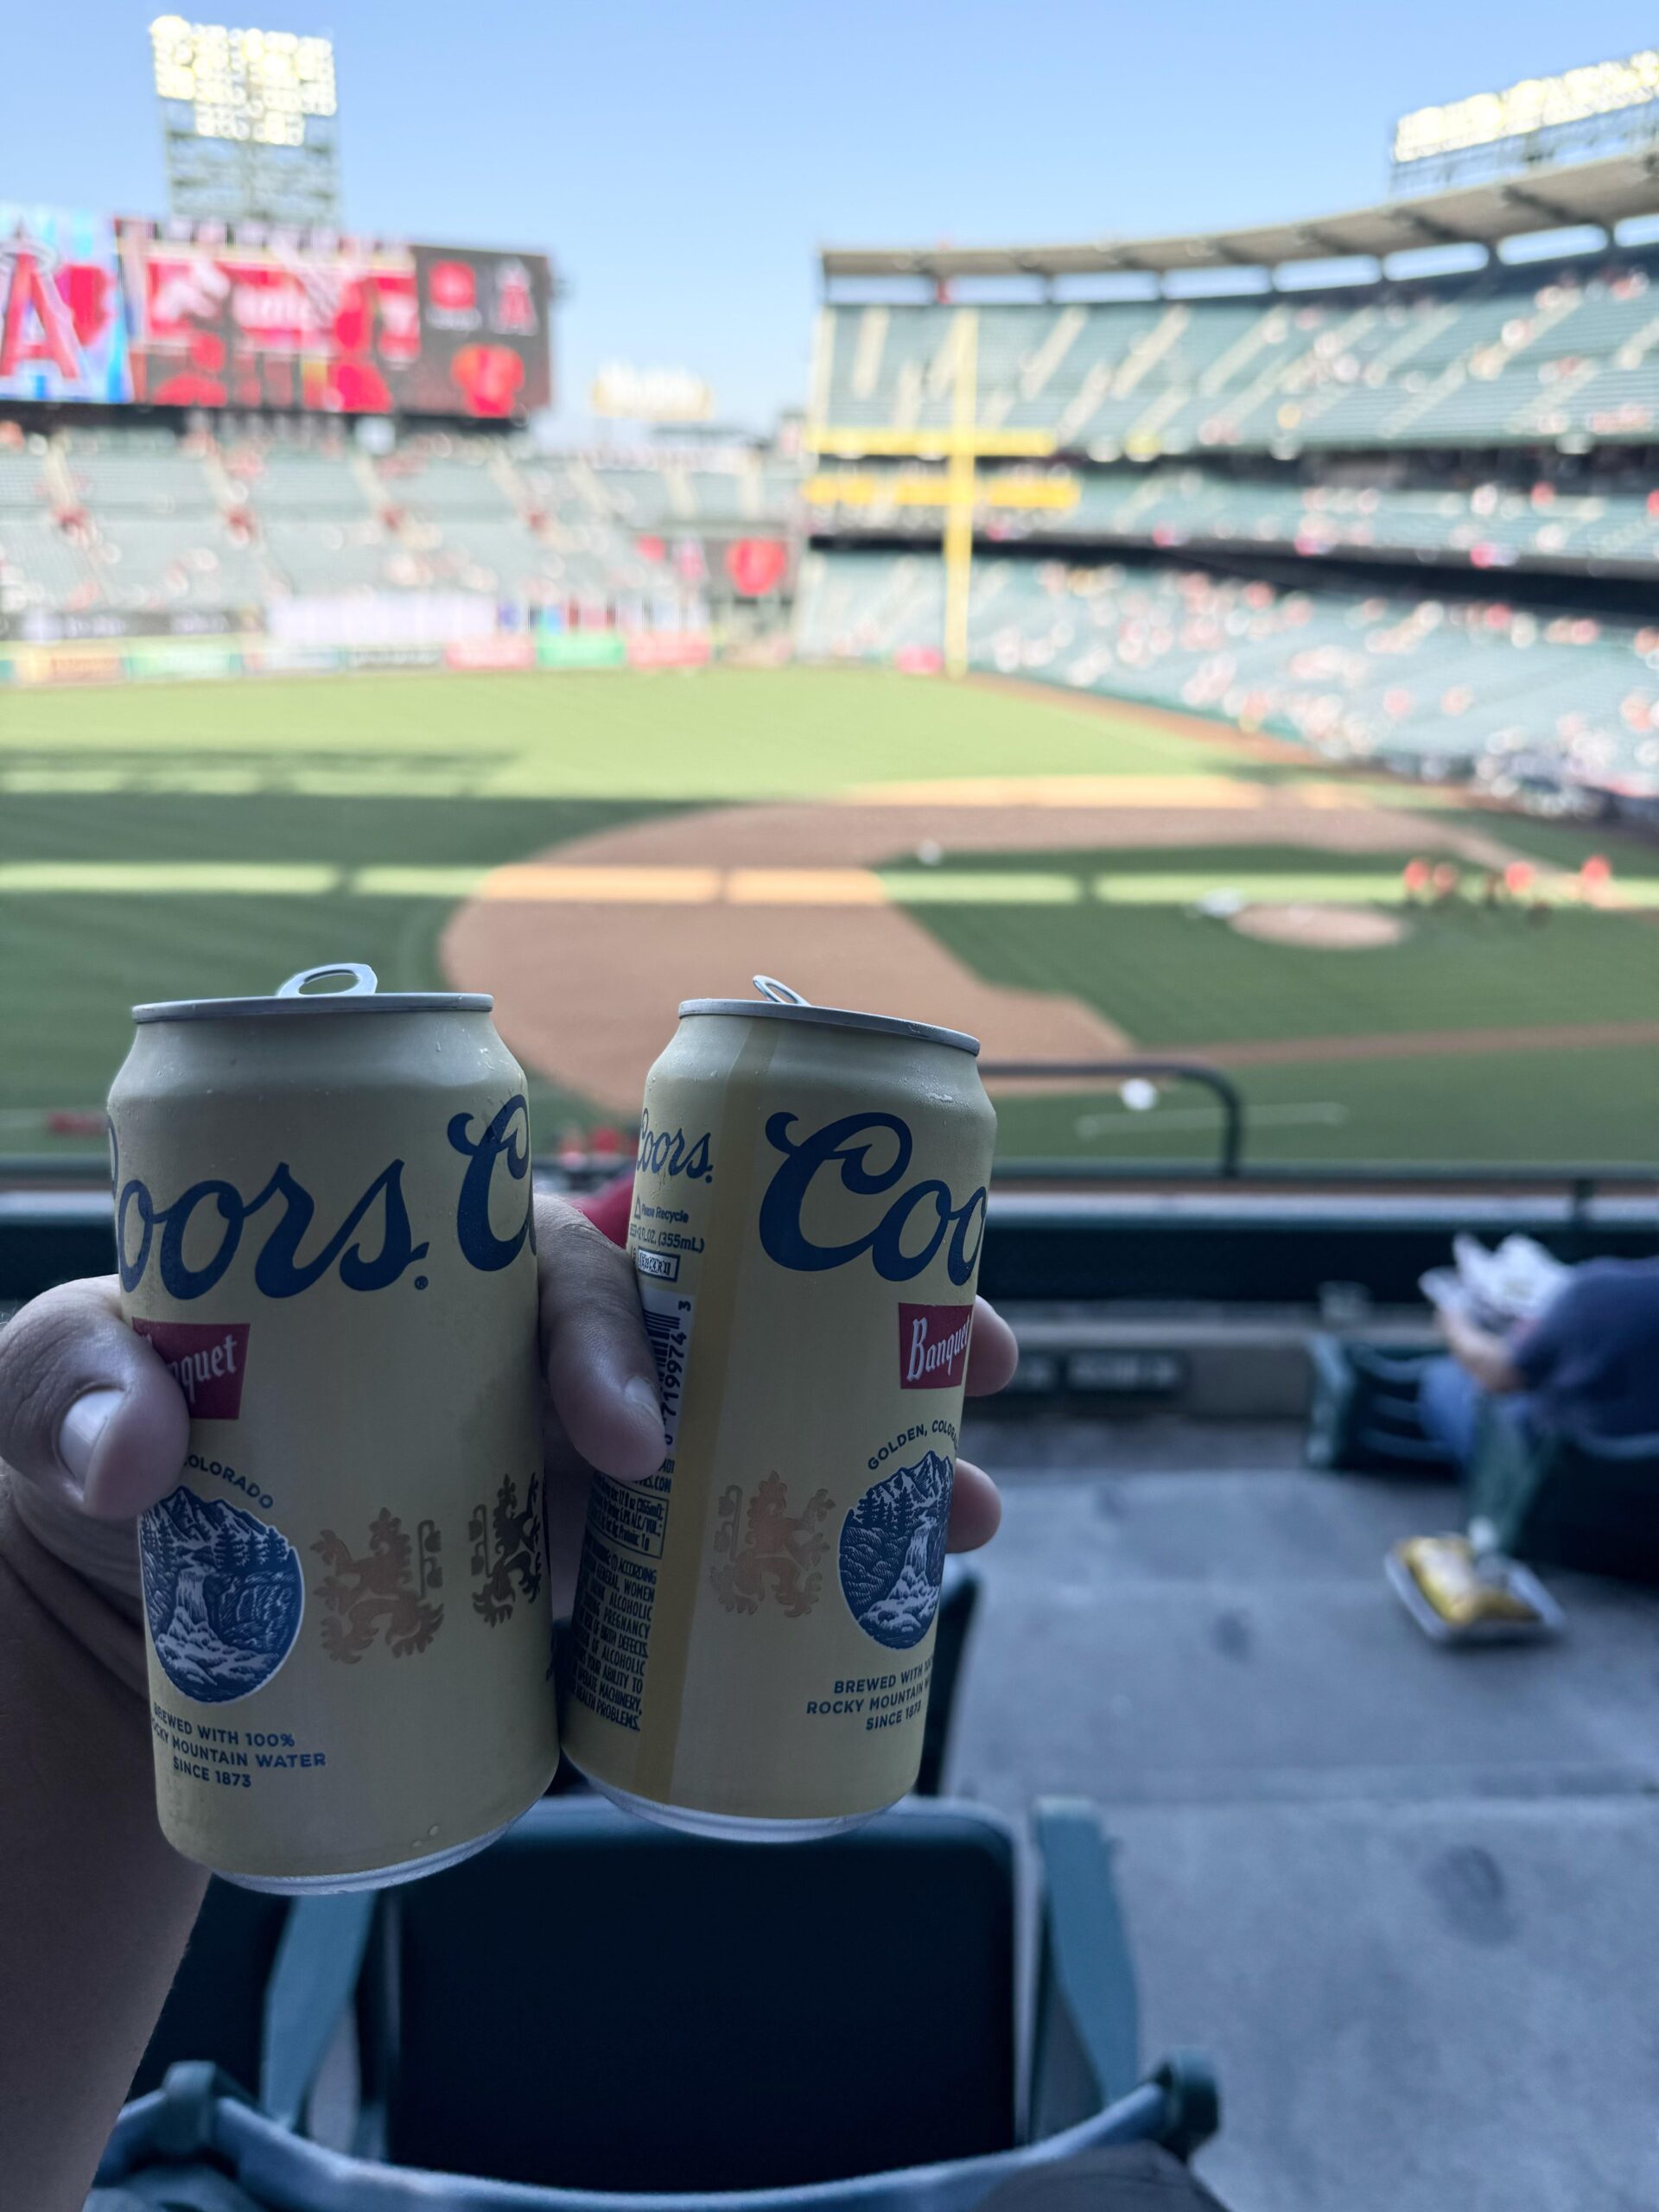 Angels stadium hack: if you can find them, two small beers is only 9 dollars. It’s the same amount of beer as a tall can which is $15.